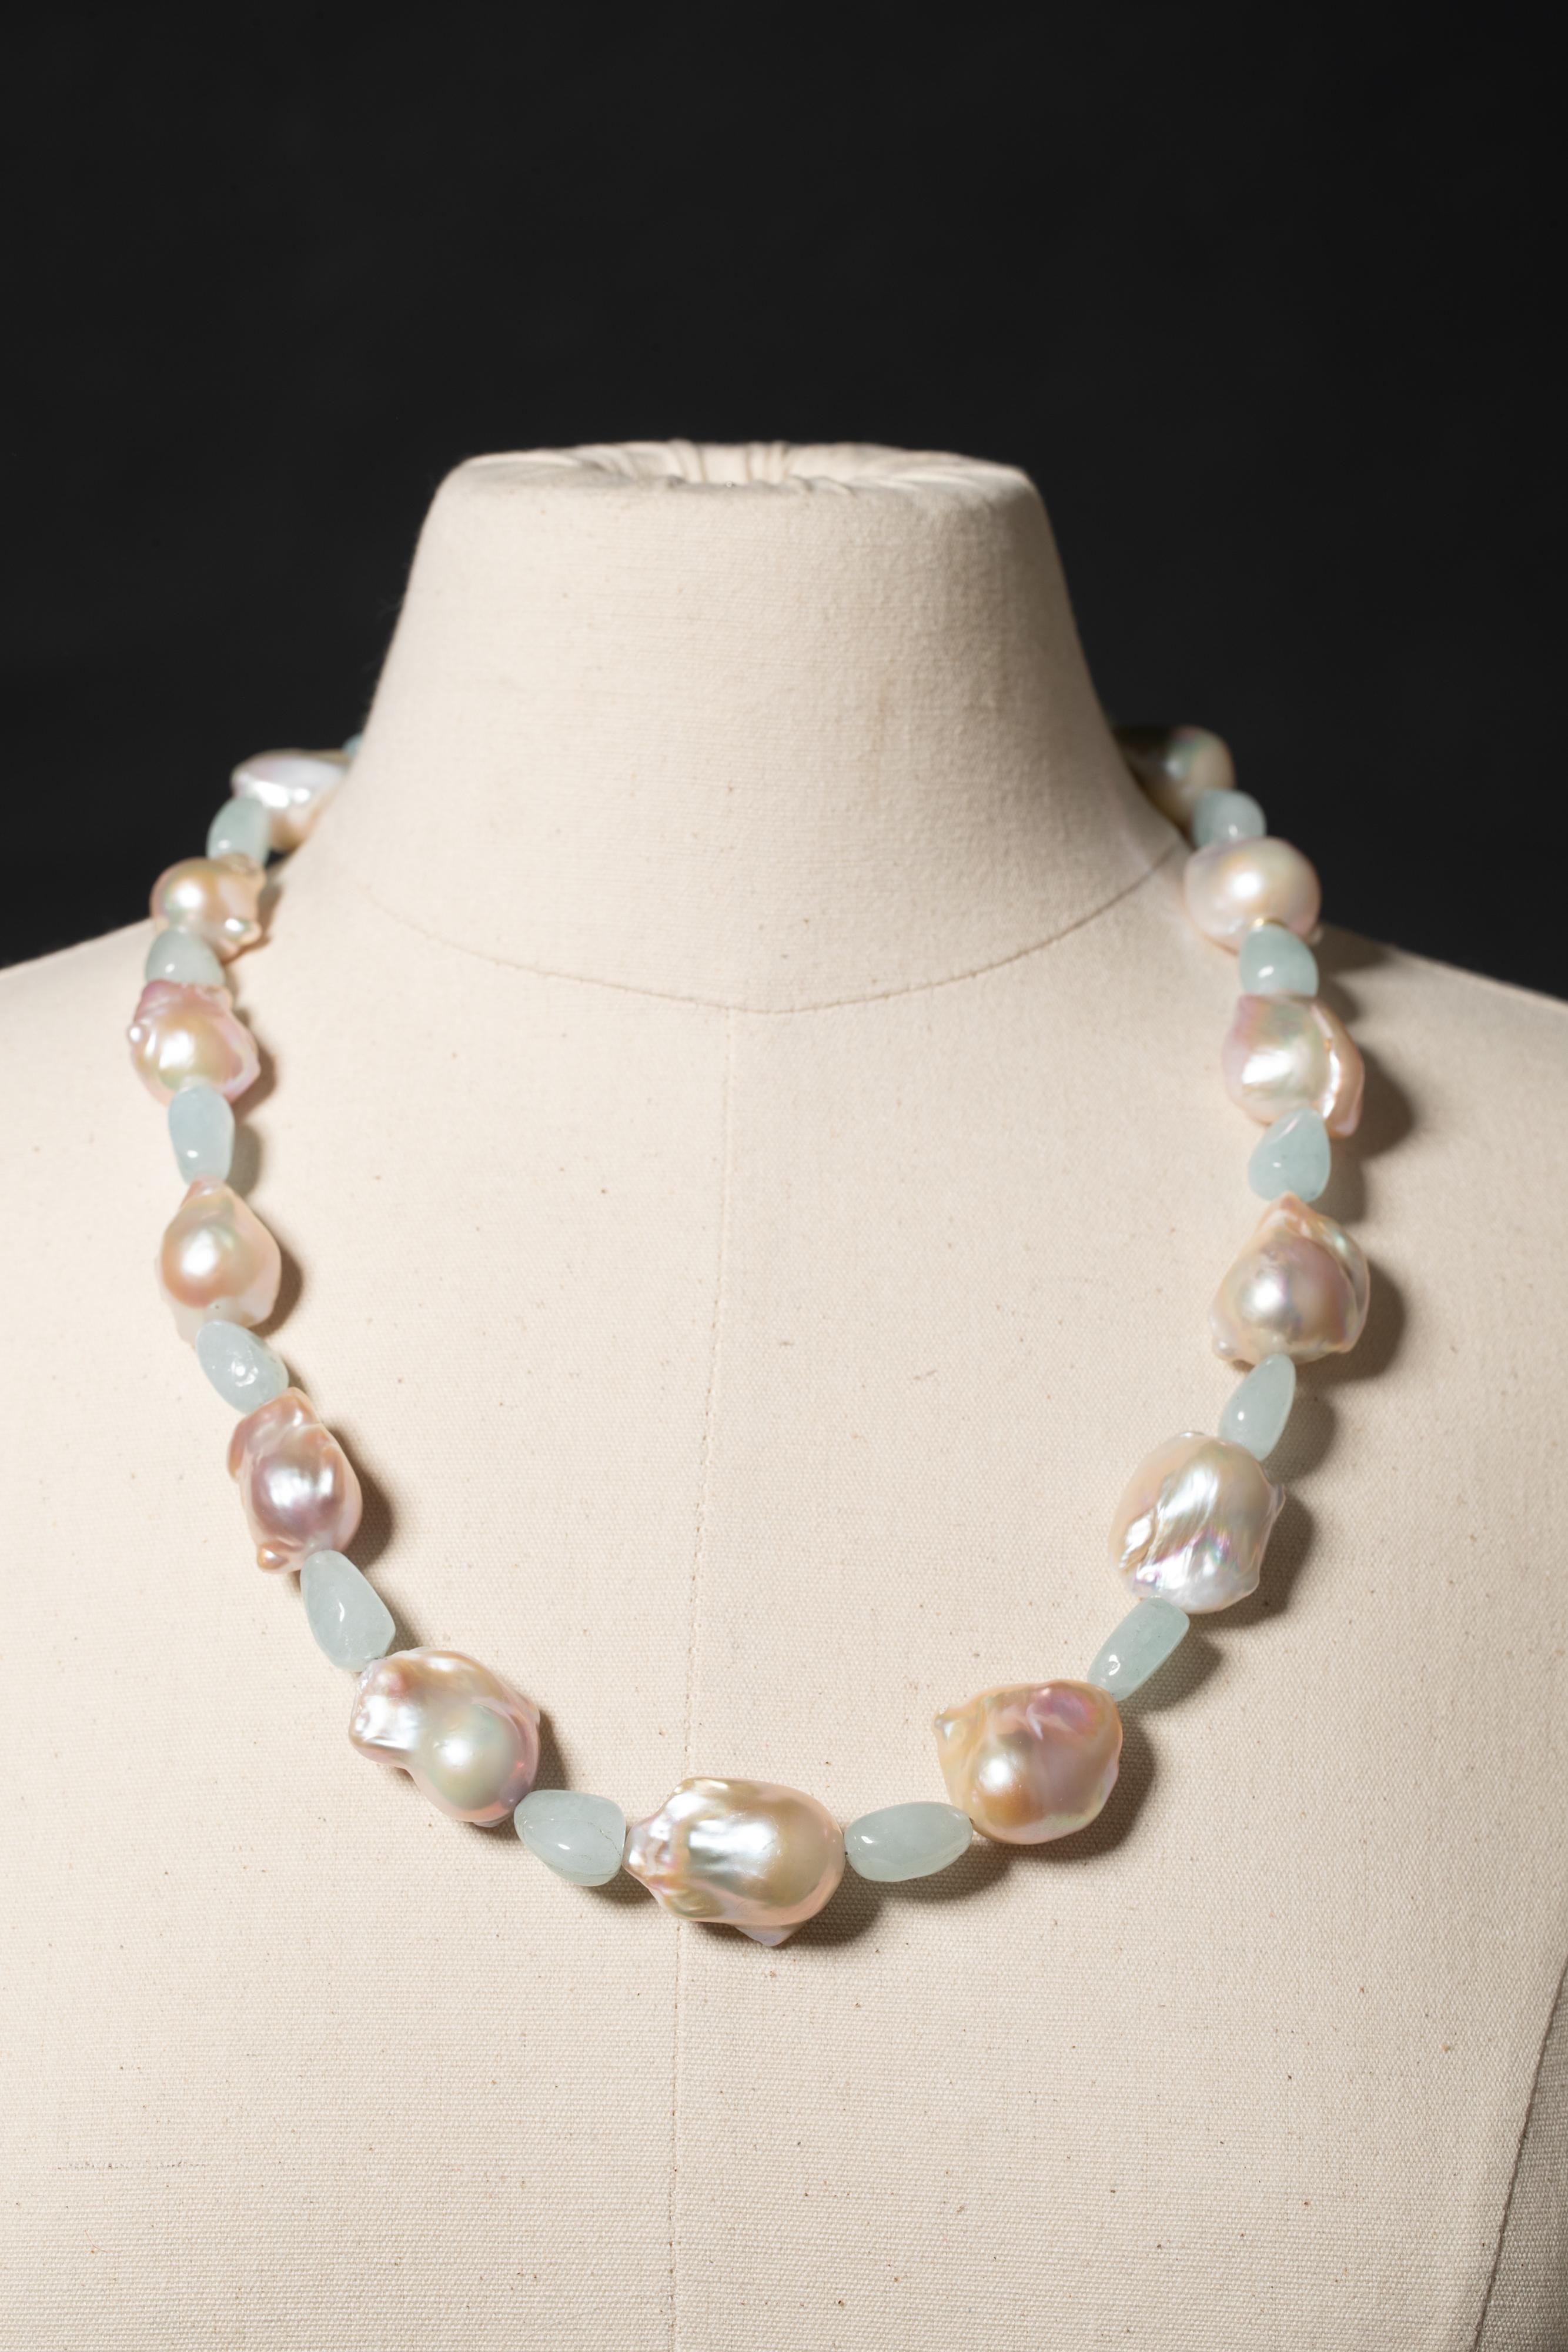 A versatile necklace of rare blush baroque pearls with tumbled aquamarines between.  This can be worn long or short as there is a jump ring quietly placed to clasp it at 19